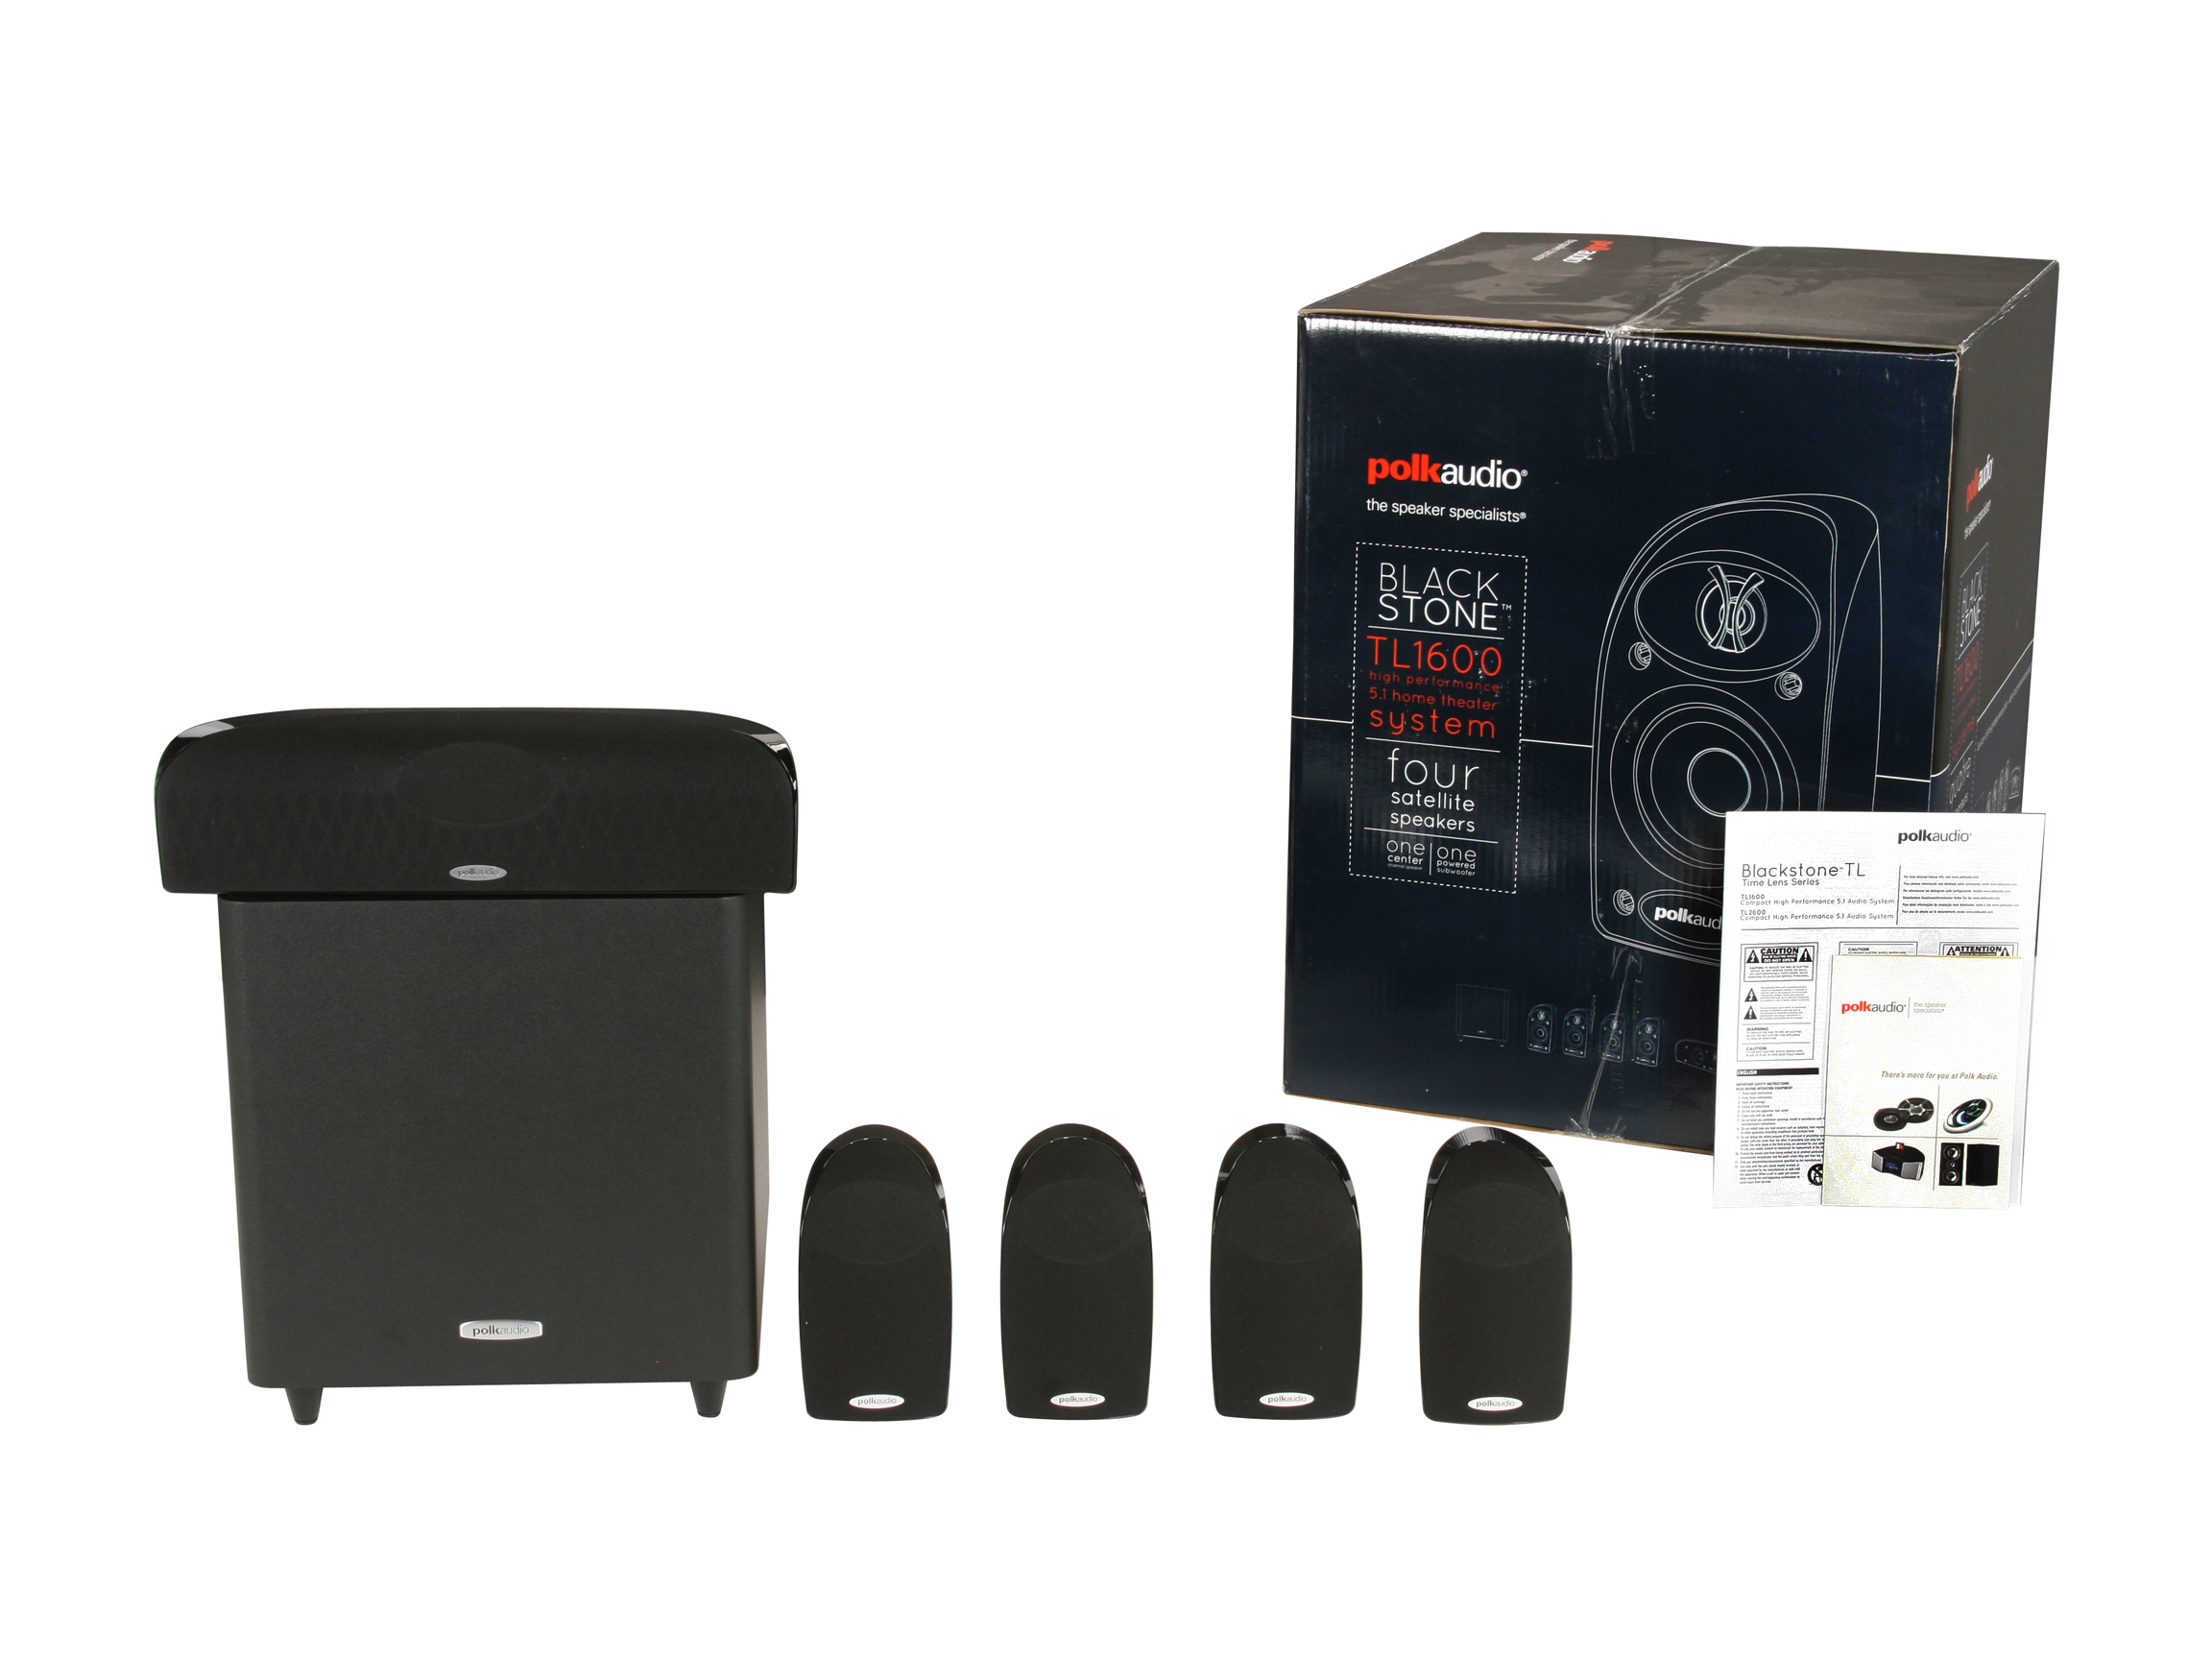 Polk Audio TL1600 5.1 Compact Surround Sound Home Theater System with Powered Subwoofer $149